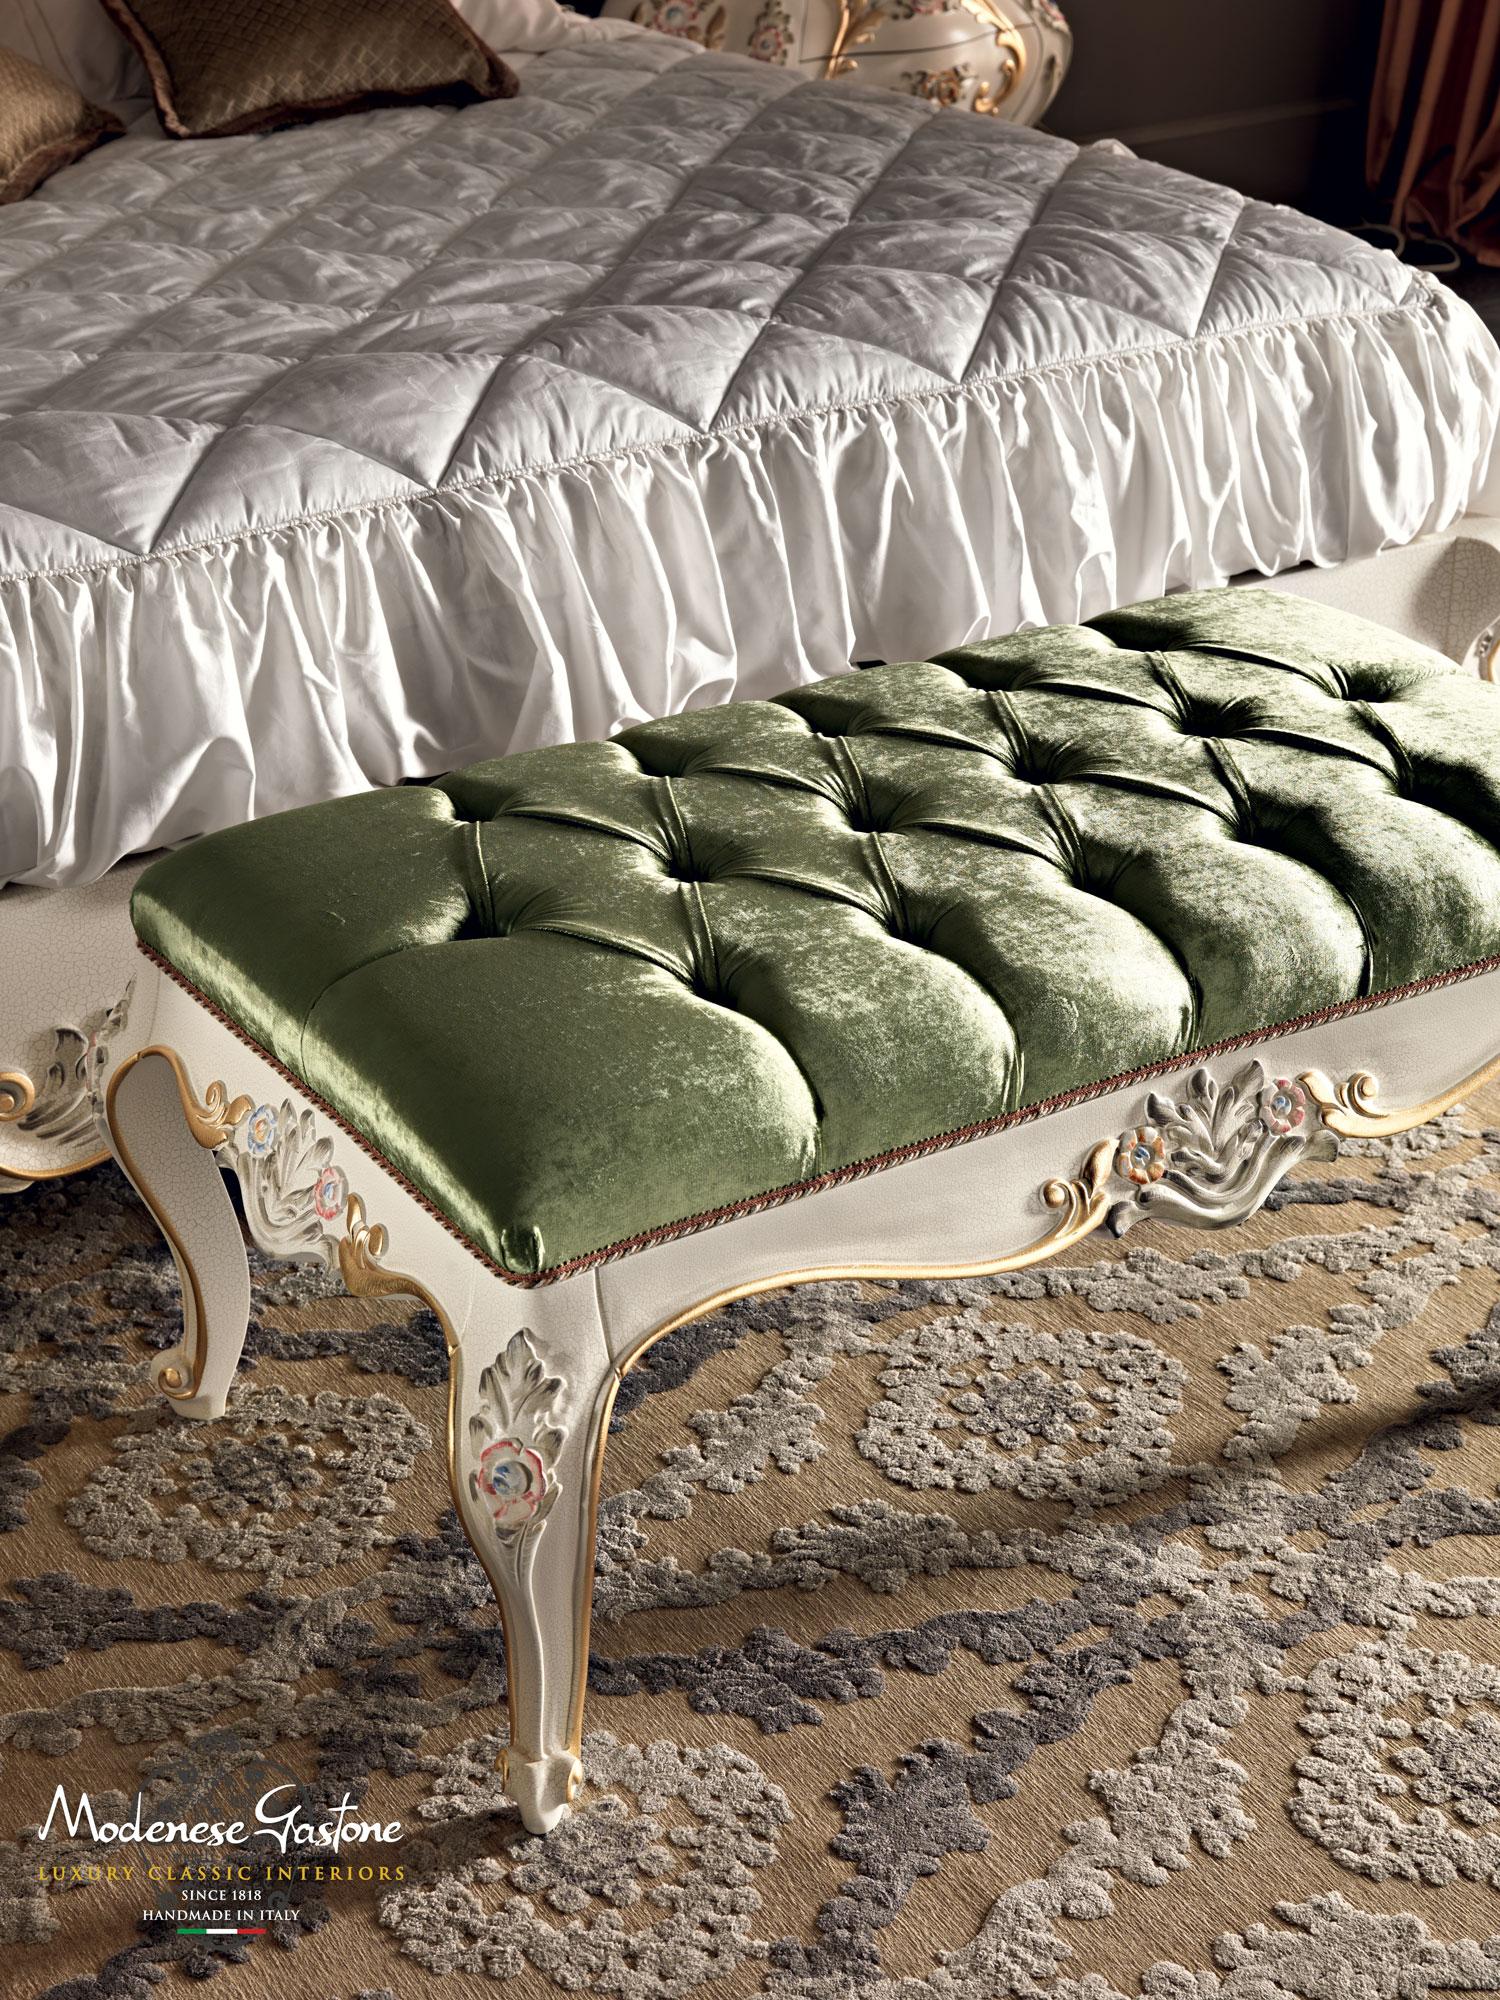 Contemporary 21st Century Royal Double Bed, Baroque Handpainted by Modenese Gastone Interiors For Sale